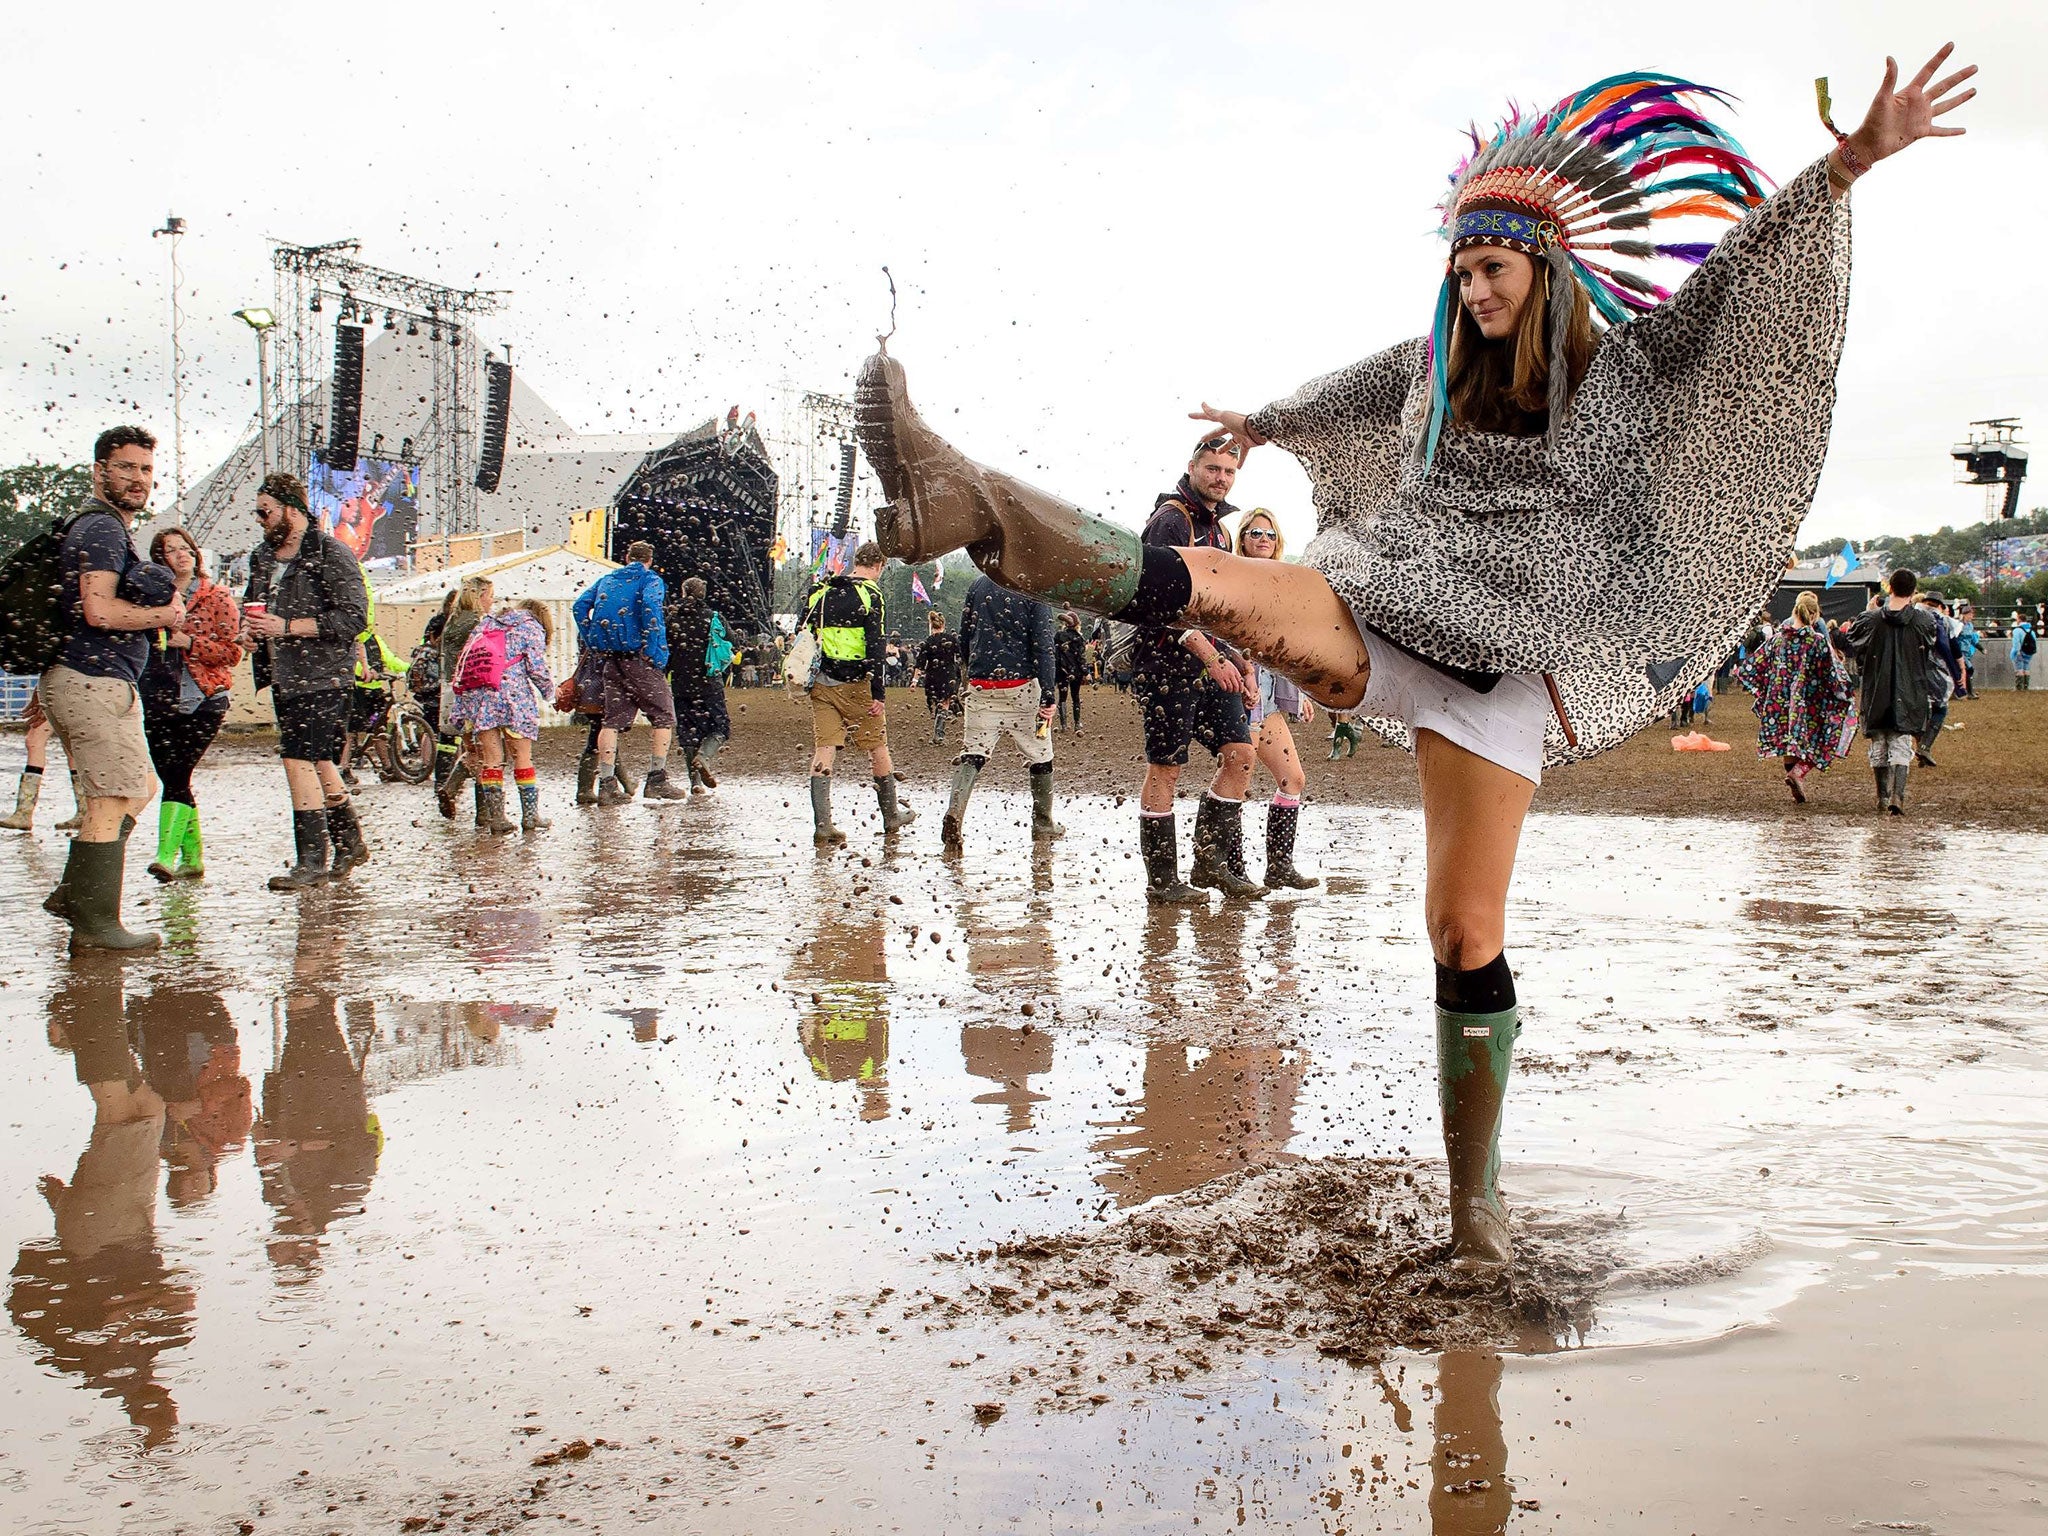 Native American headgear has been banned at Glastonbury